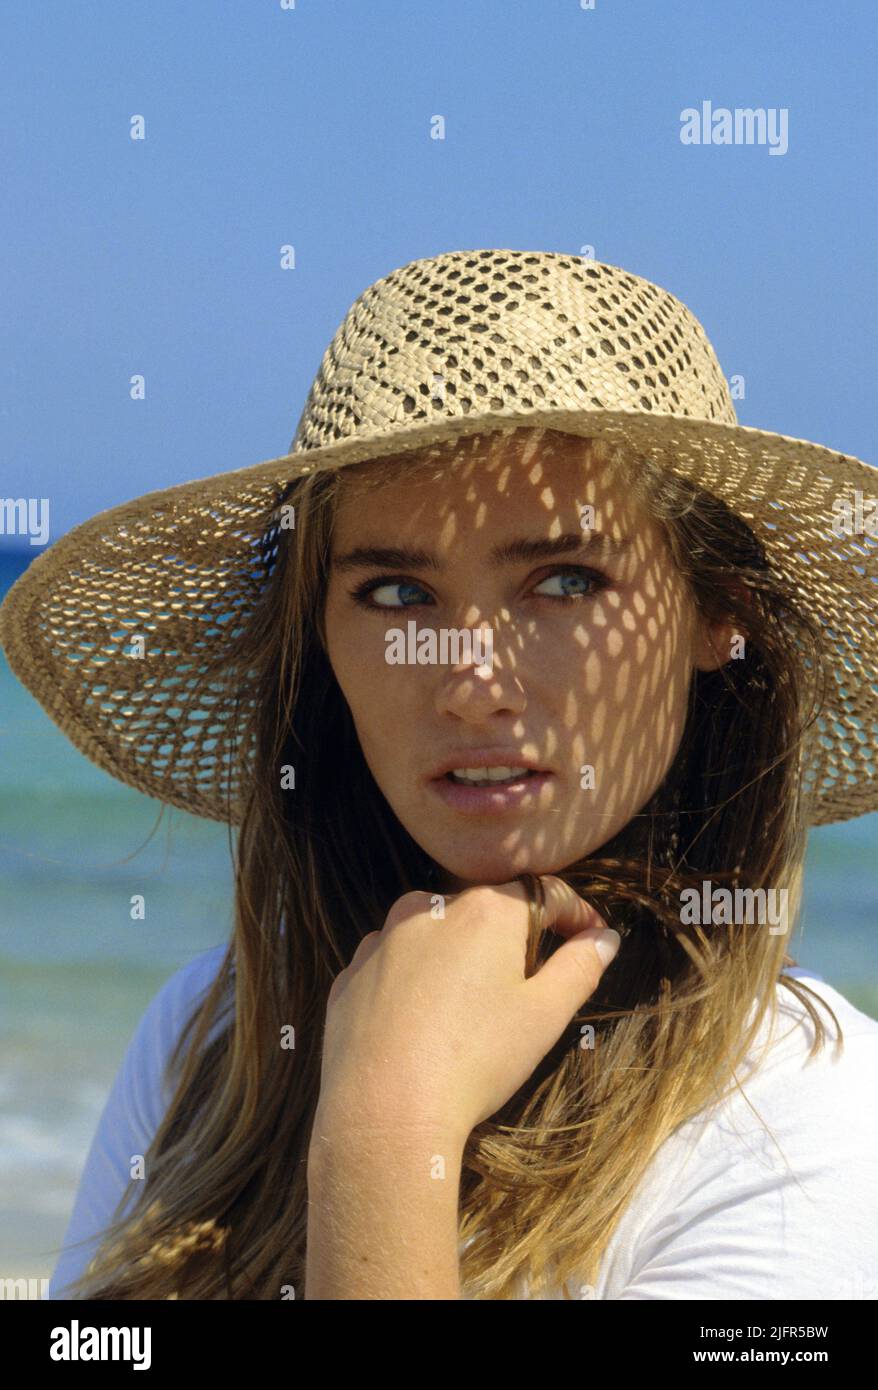 Pretty young woman looking front camerasea water backgrond blond hair good looking with straw hat very healthy Stock Photo